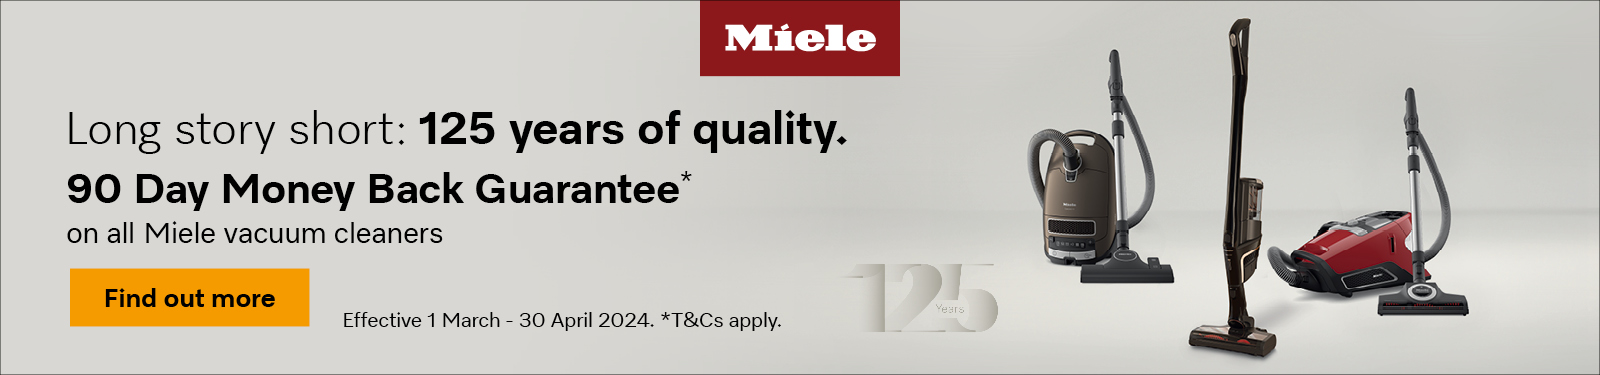 90 Day Money Back Guarantee On All Miele Vacuum Cleaners at Retravision